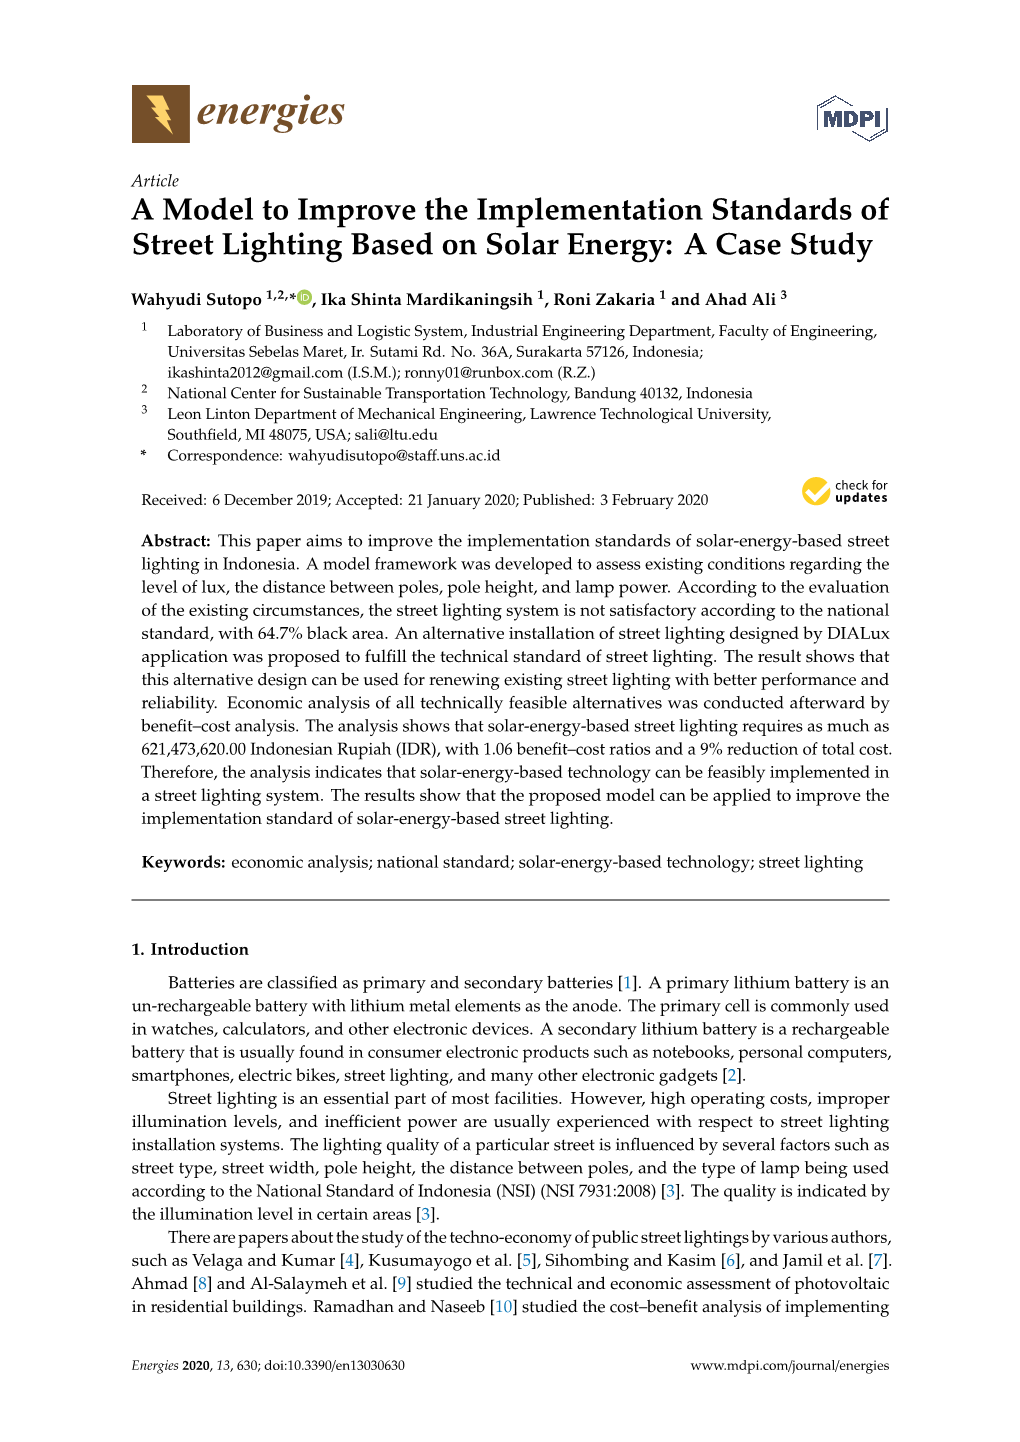 A Model to Improve the Implementation Standards of Street Lighting Based on Solar Energy: a Case Study